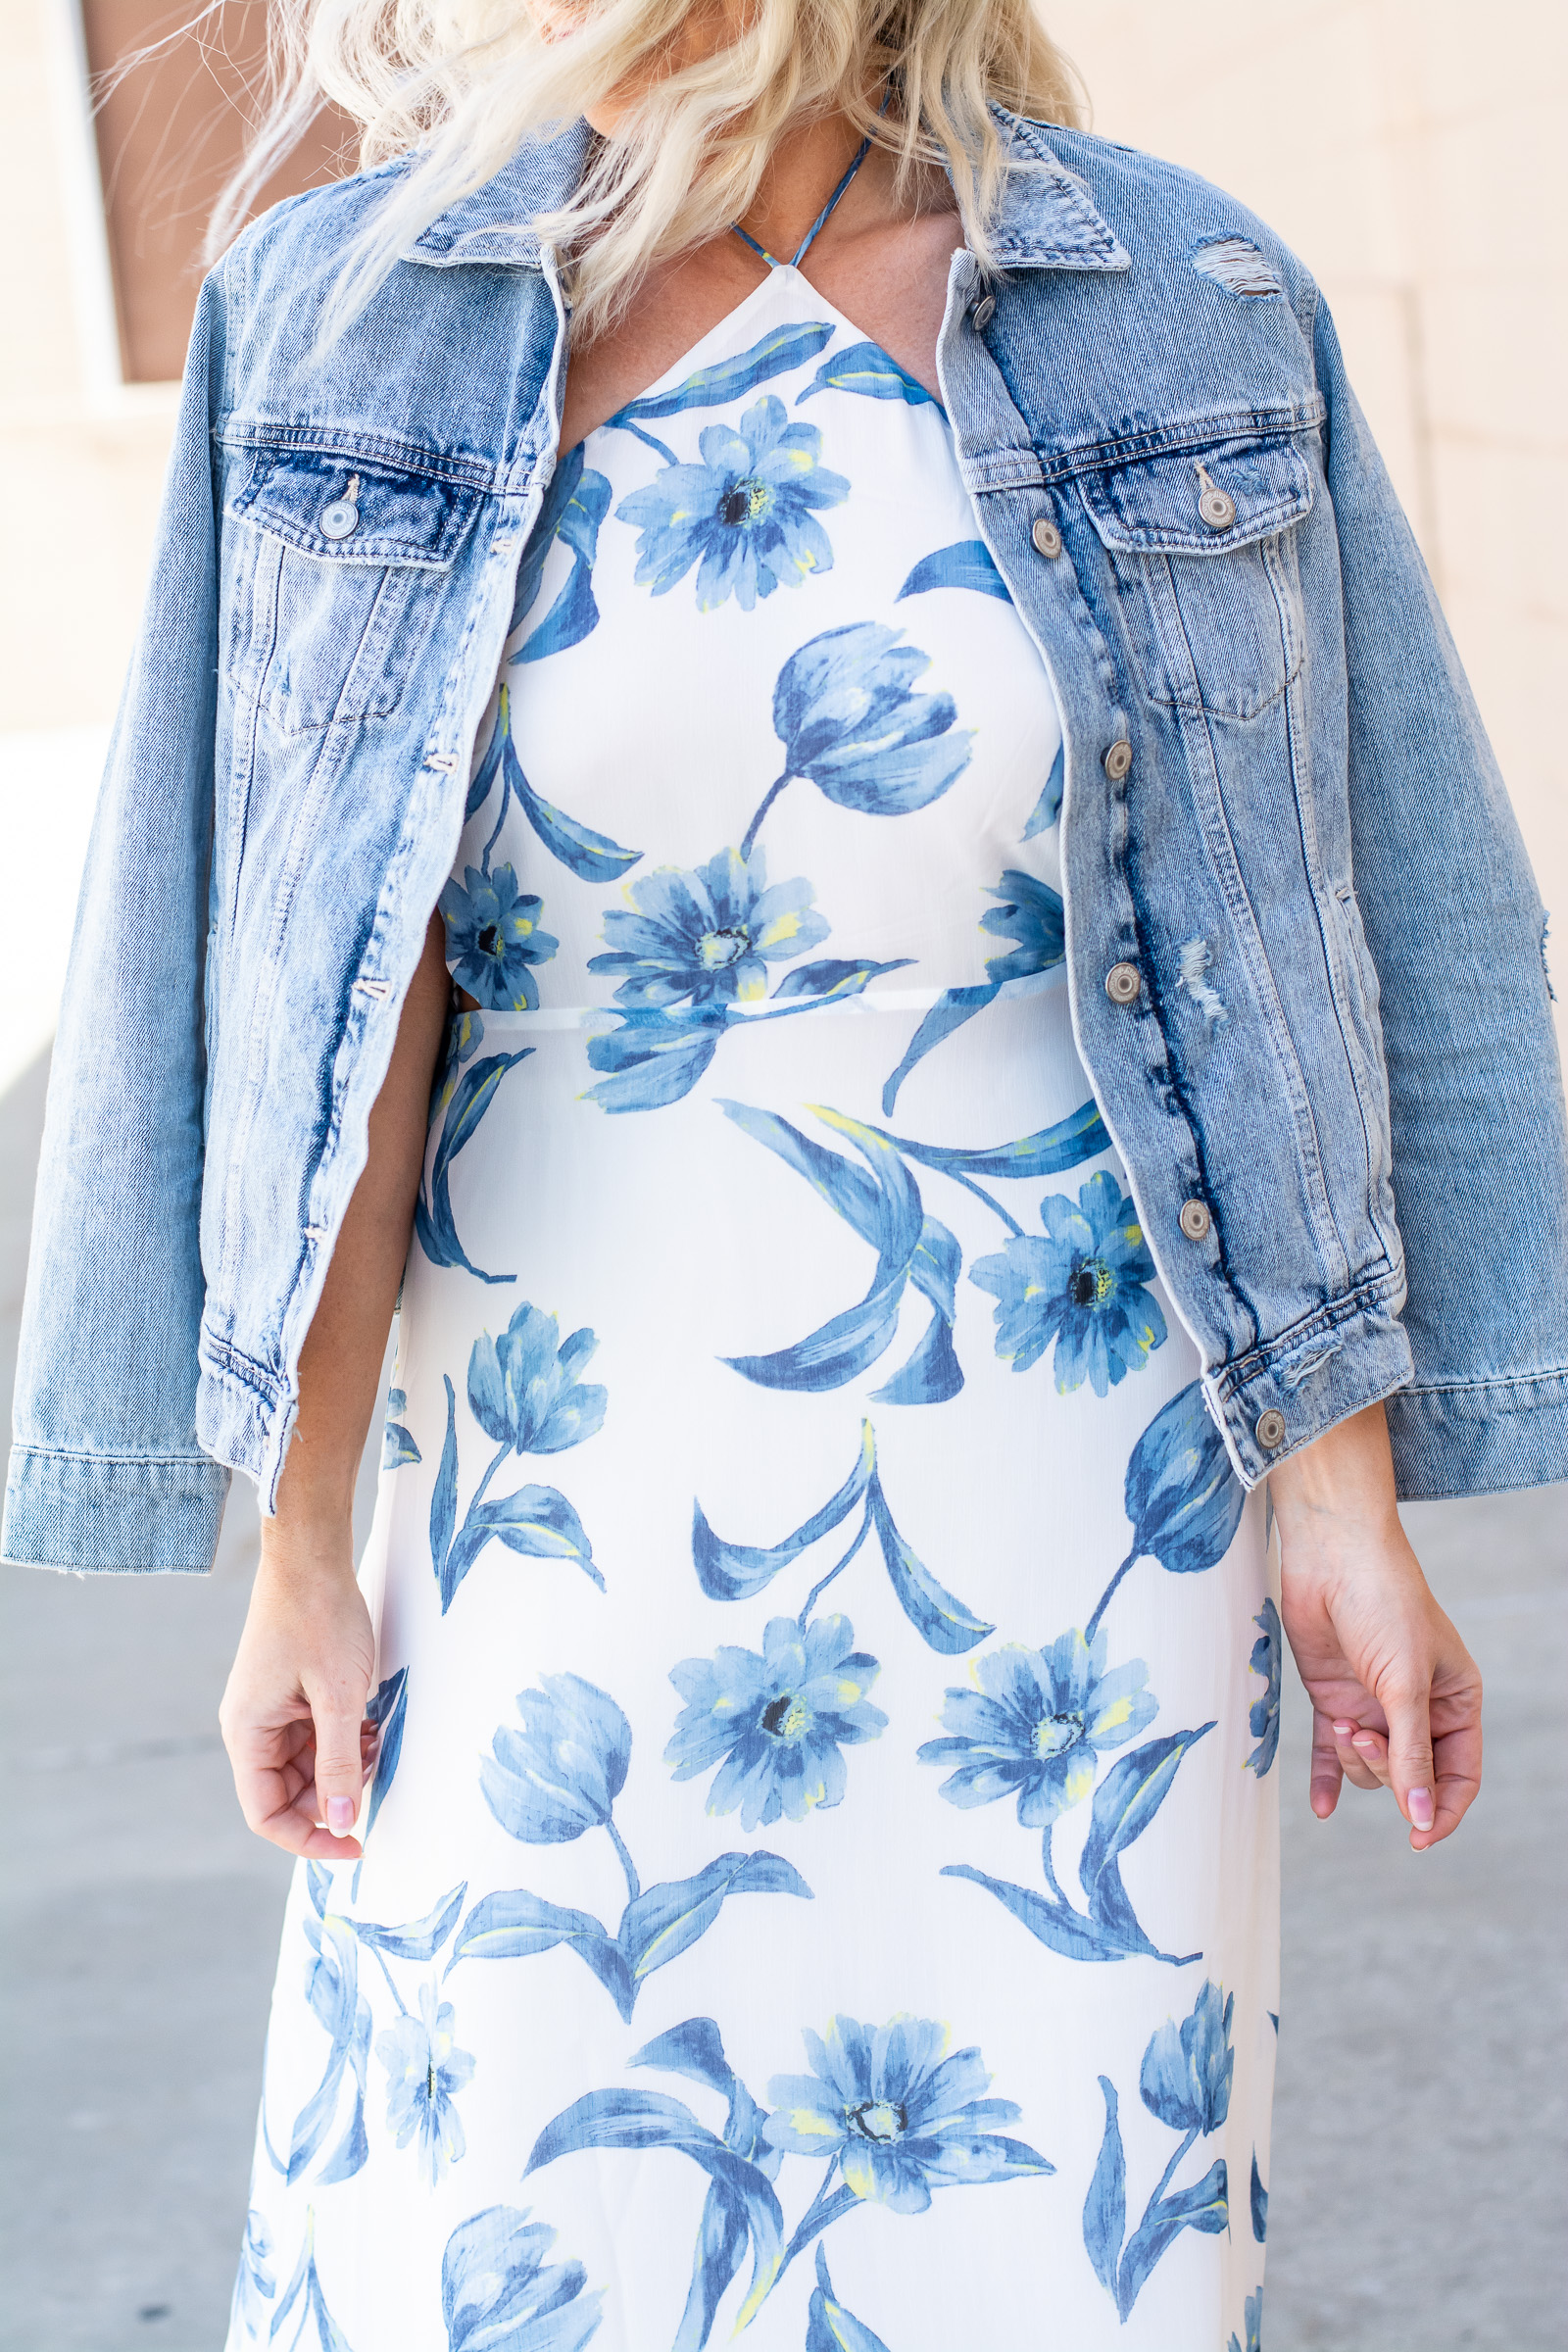 Blue + White Floral Dress for Day. | Le Stylo Rouge